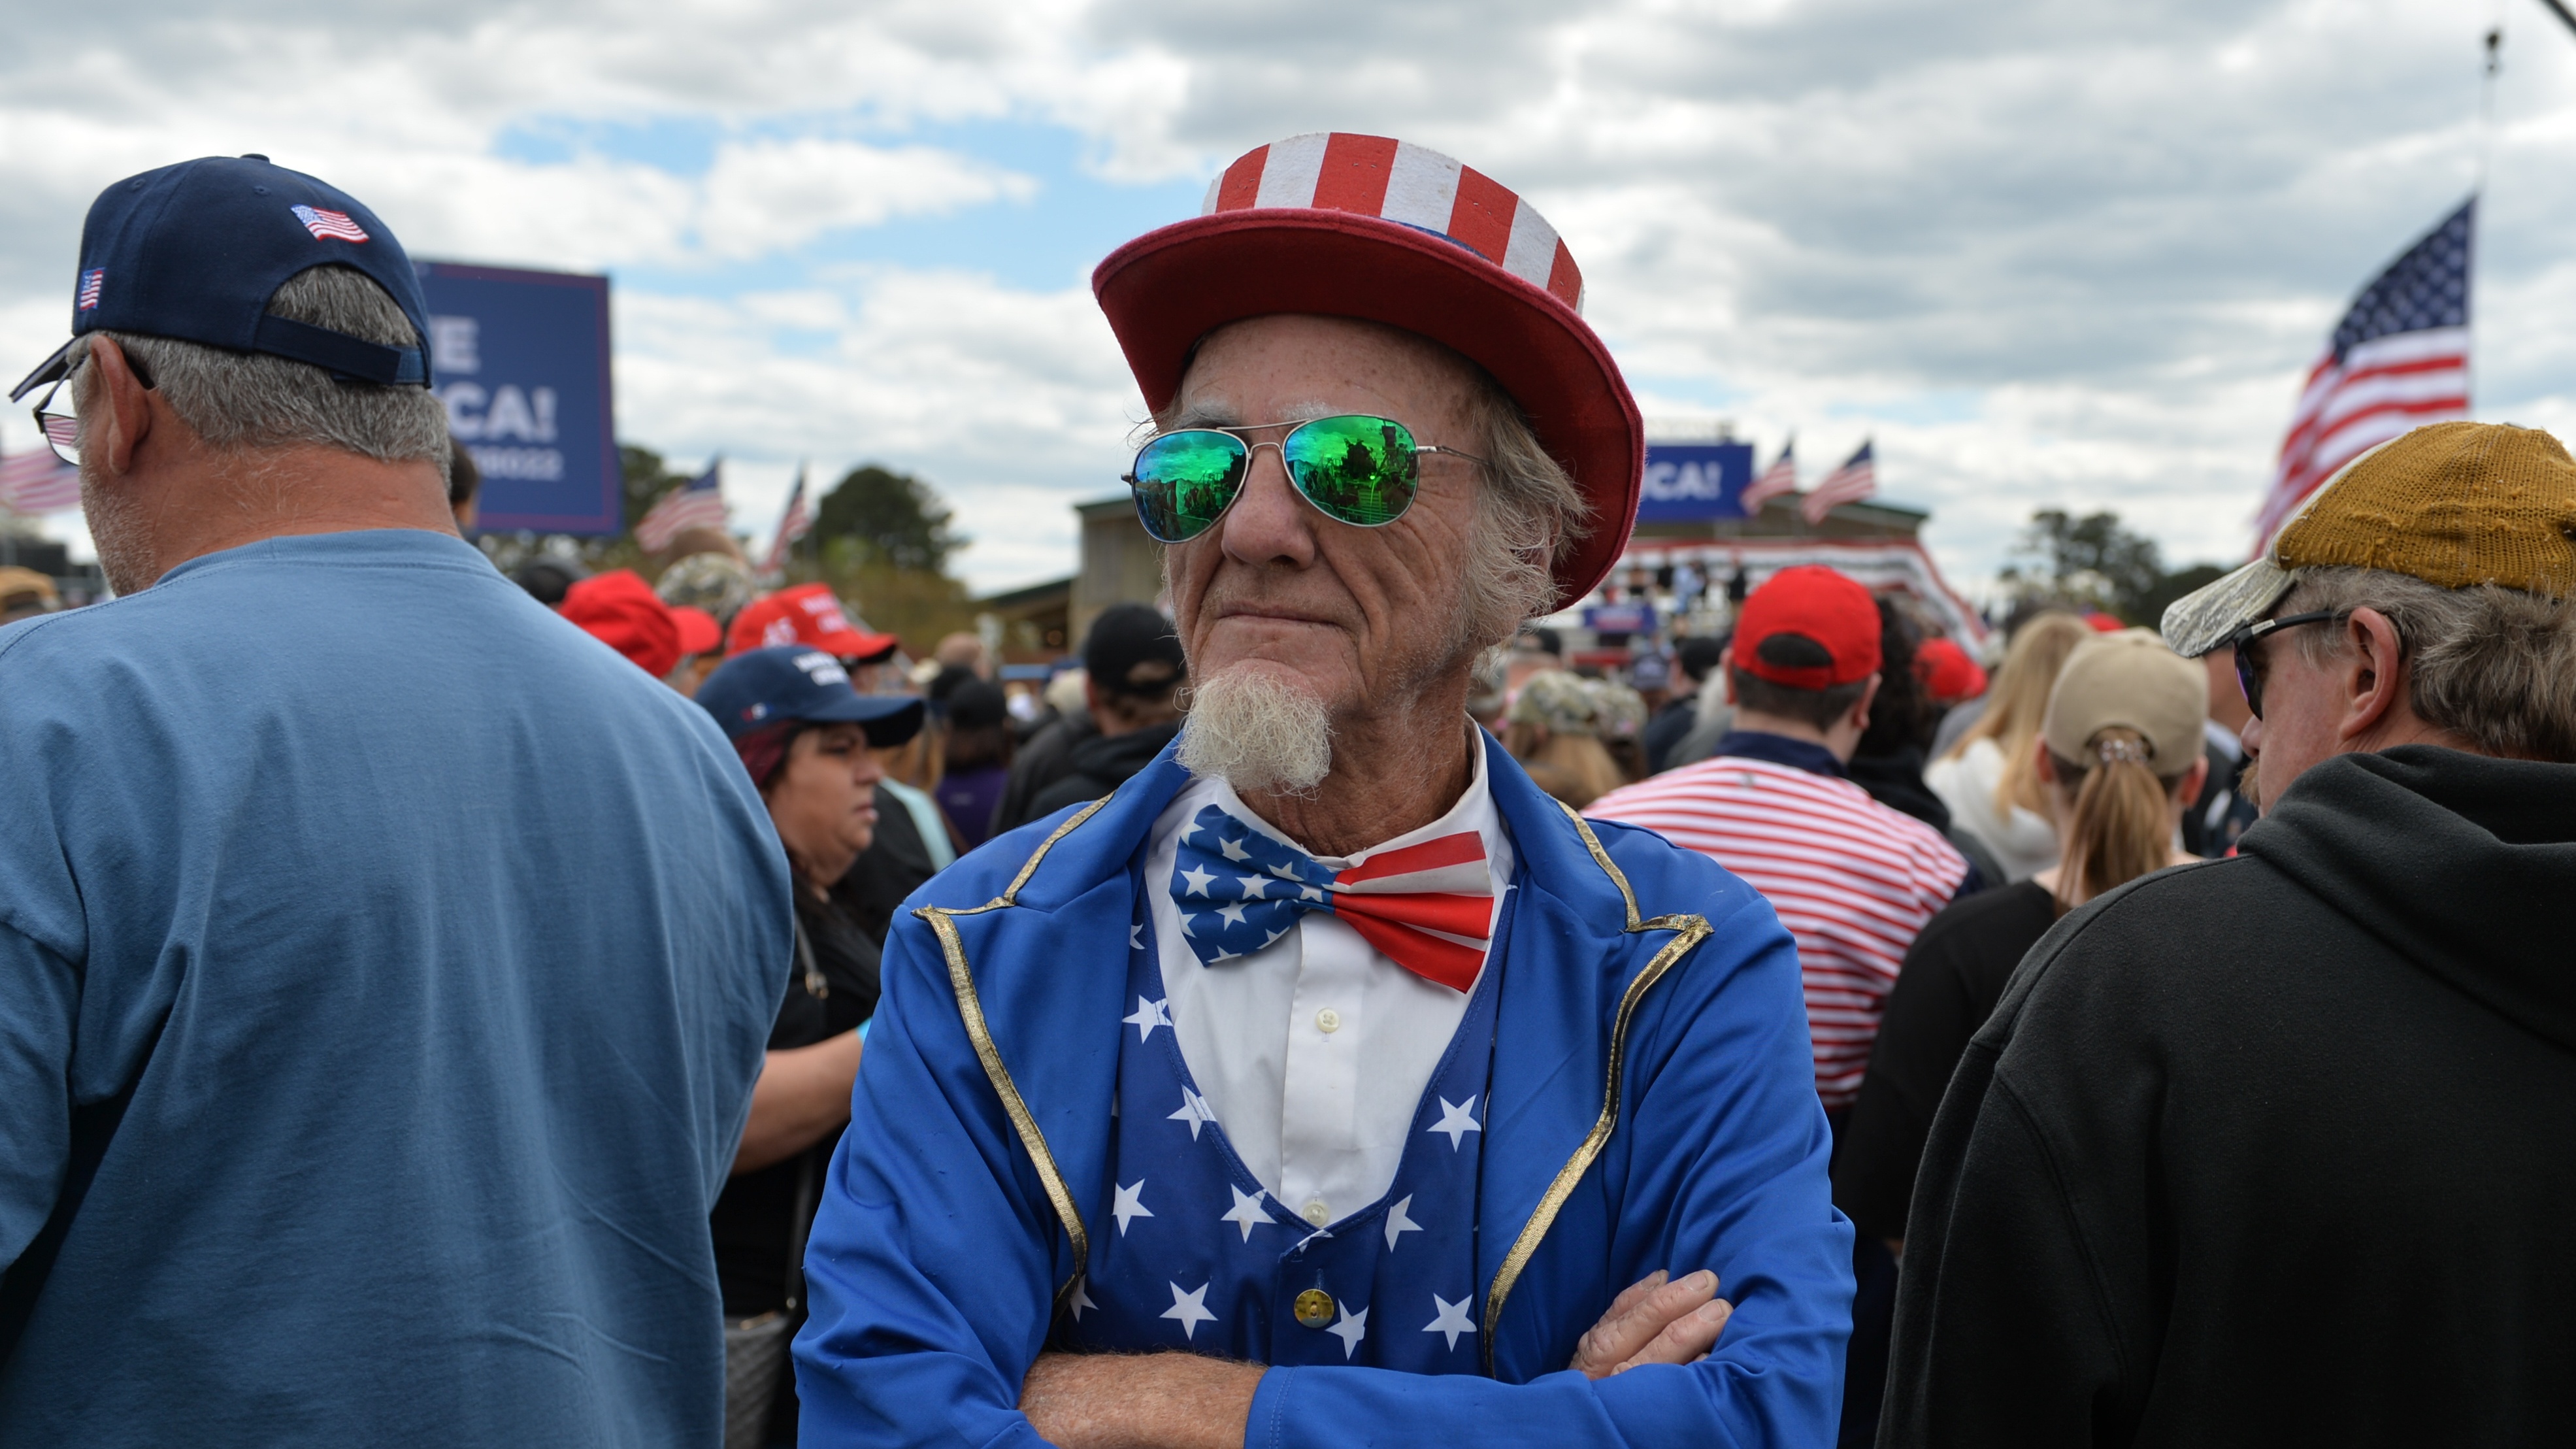 A supporter of Donald Trump at a recent rally in North Carolina 